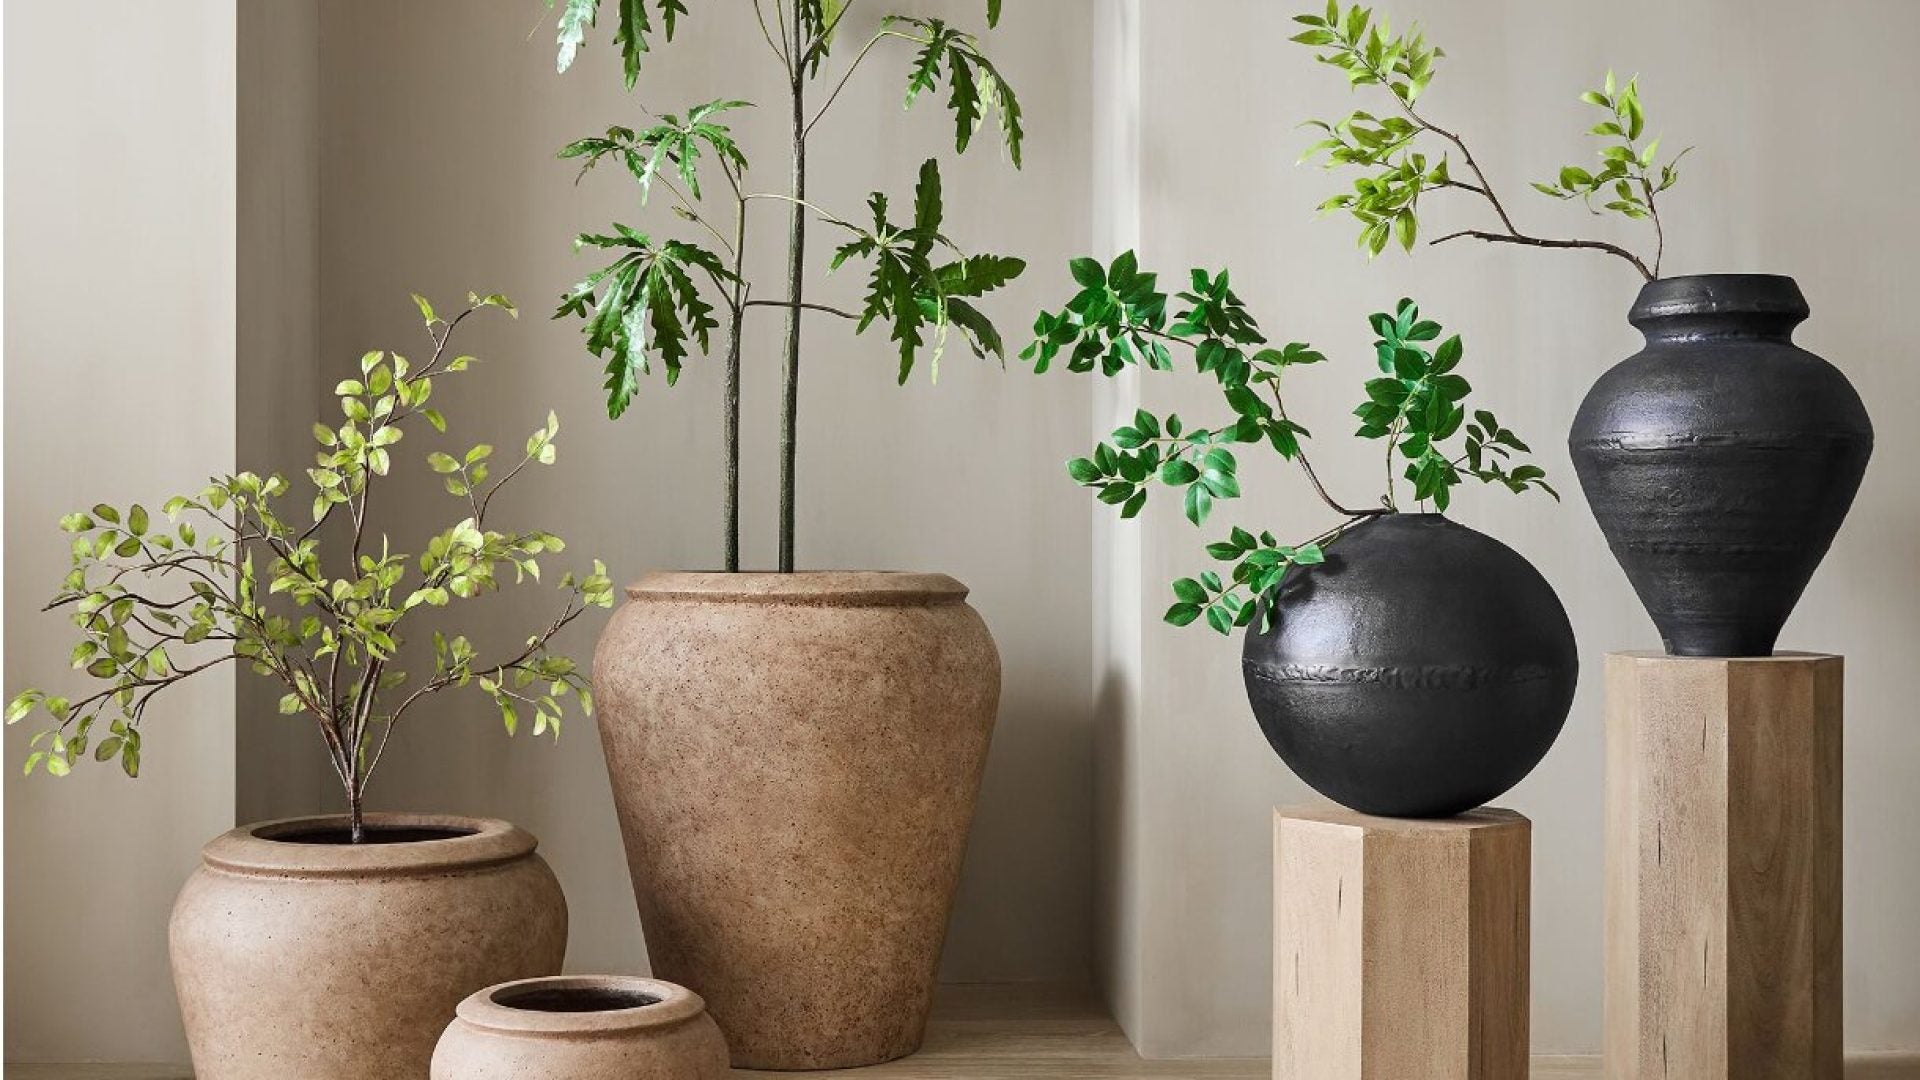 Found: Chic Indoor Planters To Decorate Your Space